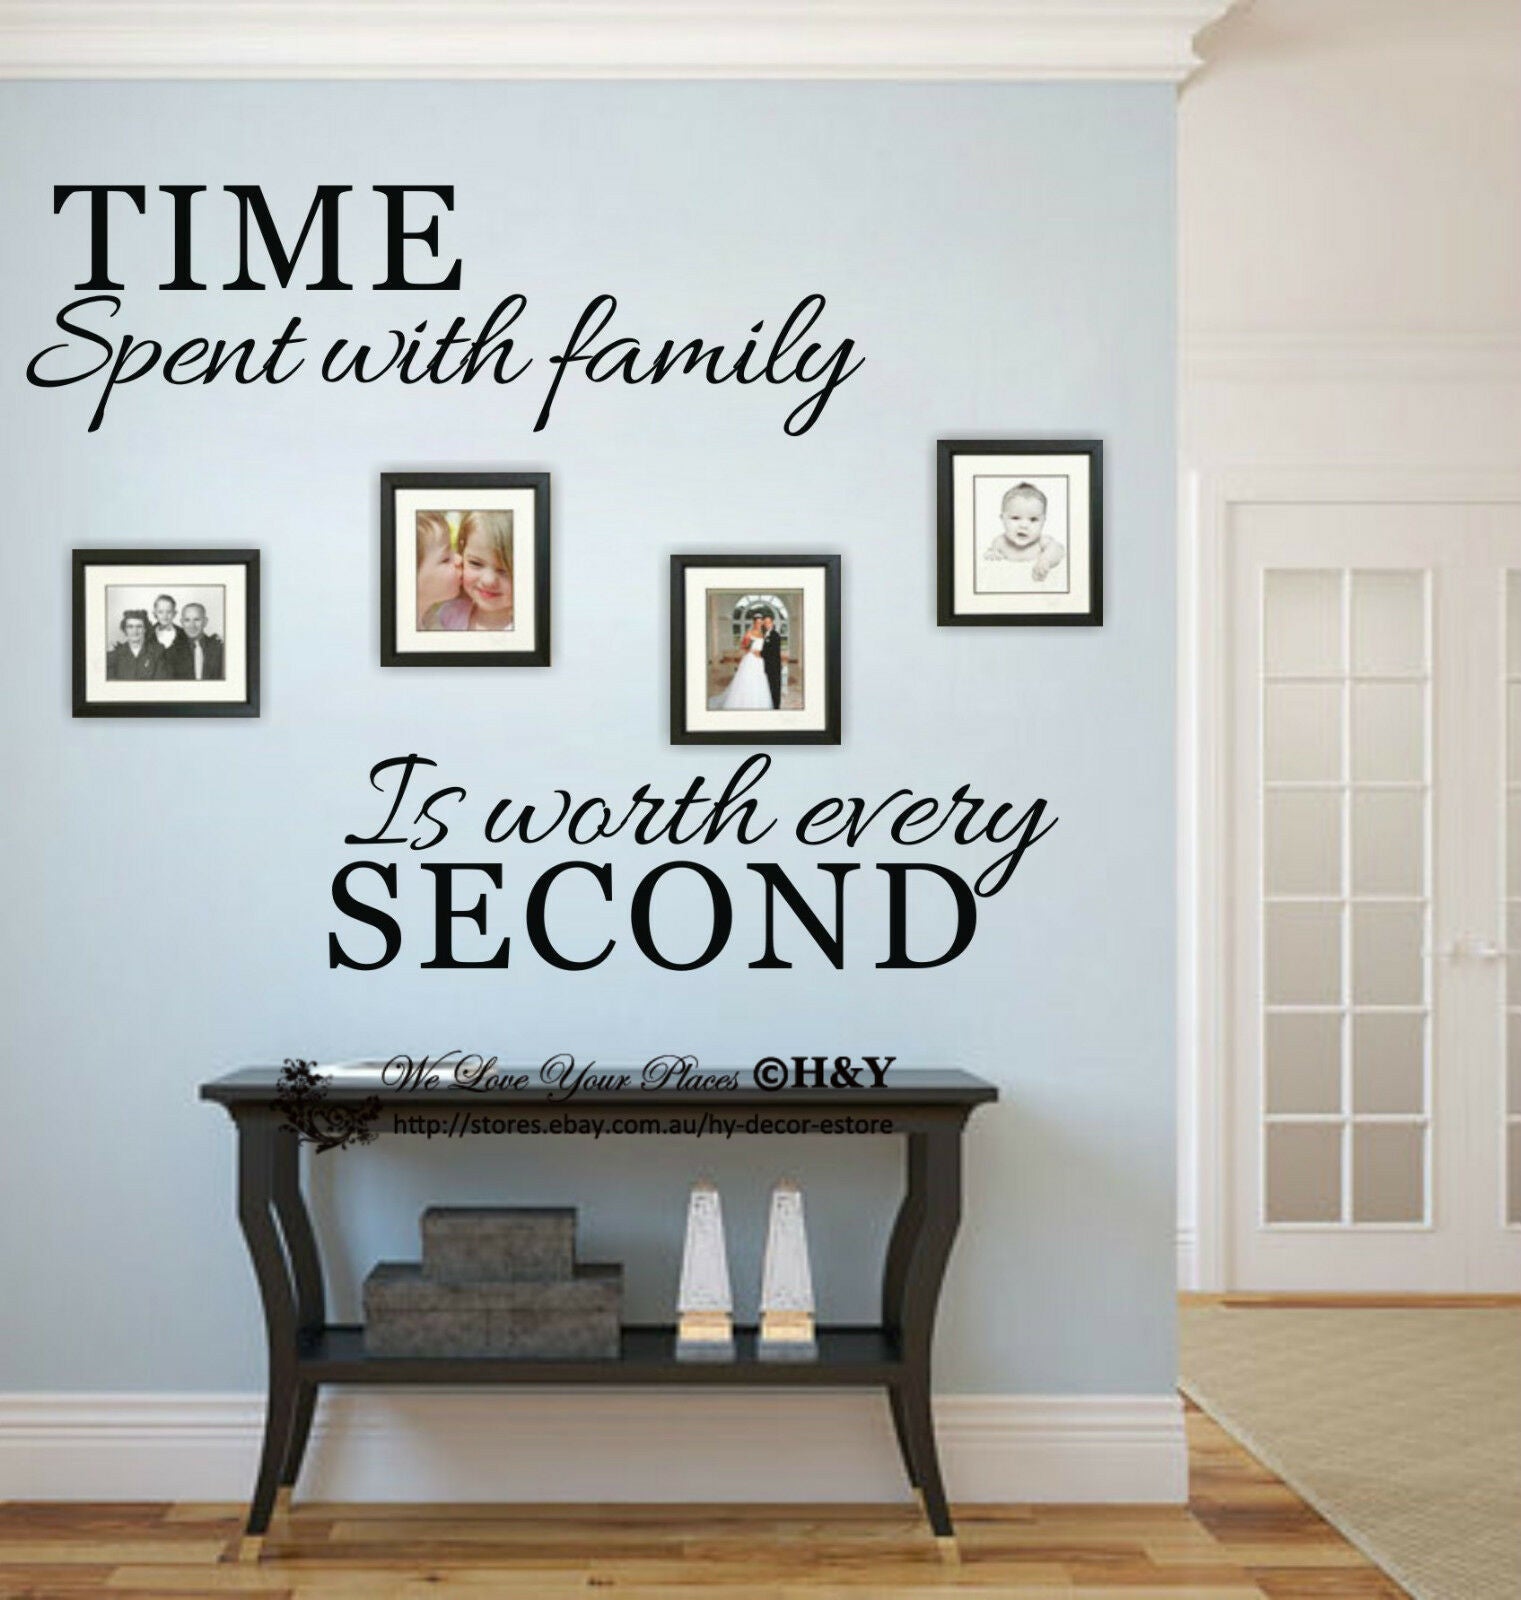 "TIME Spent with family Is worth every SECOND" Wall Art